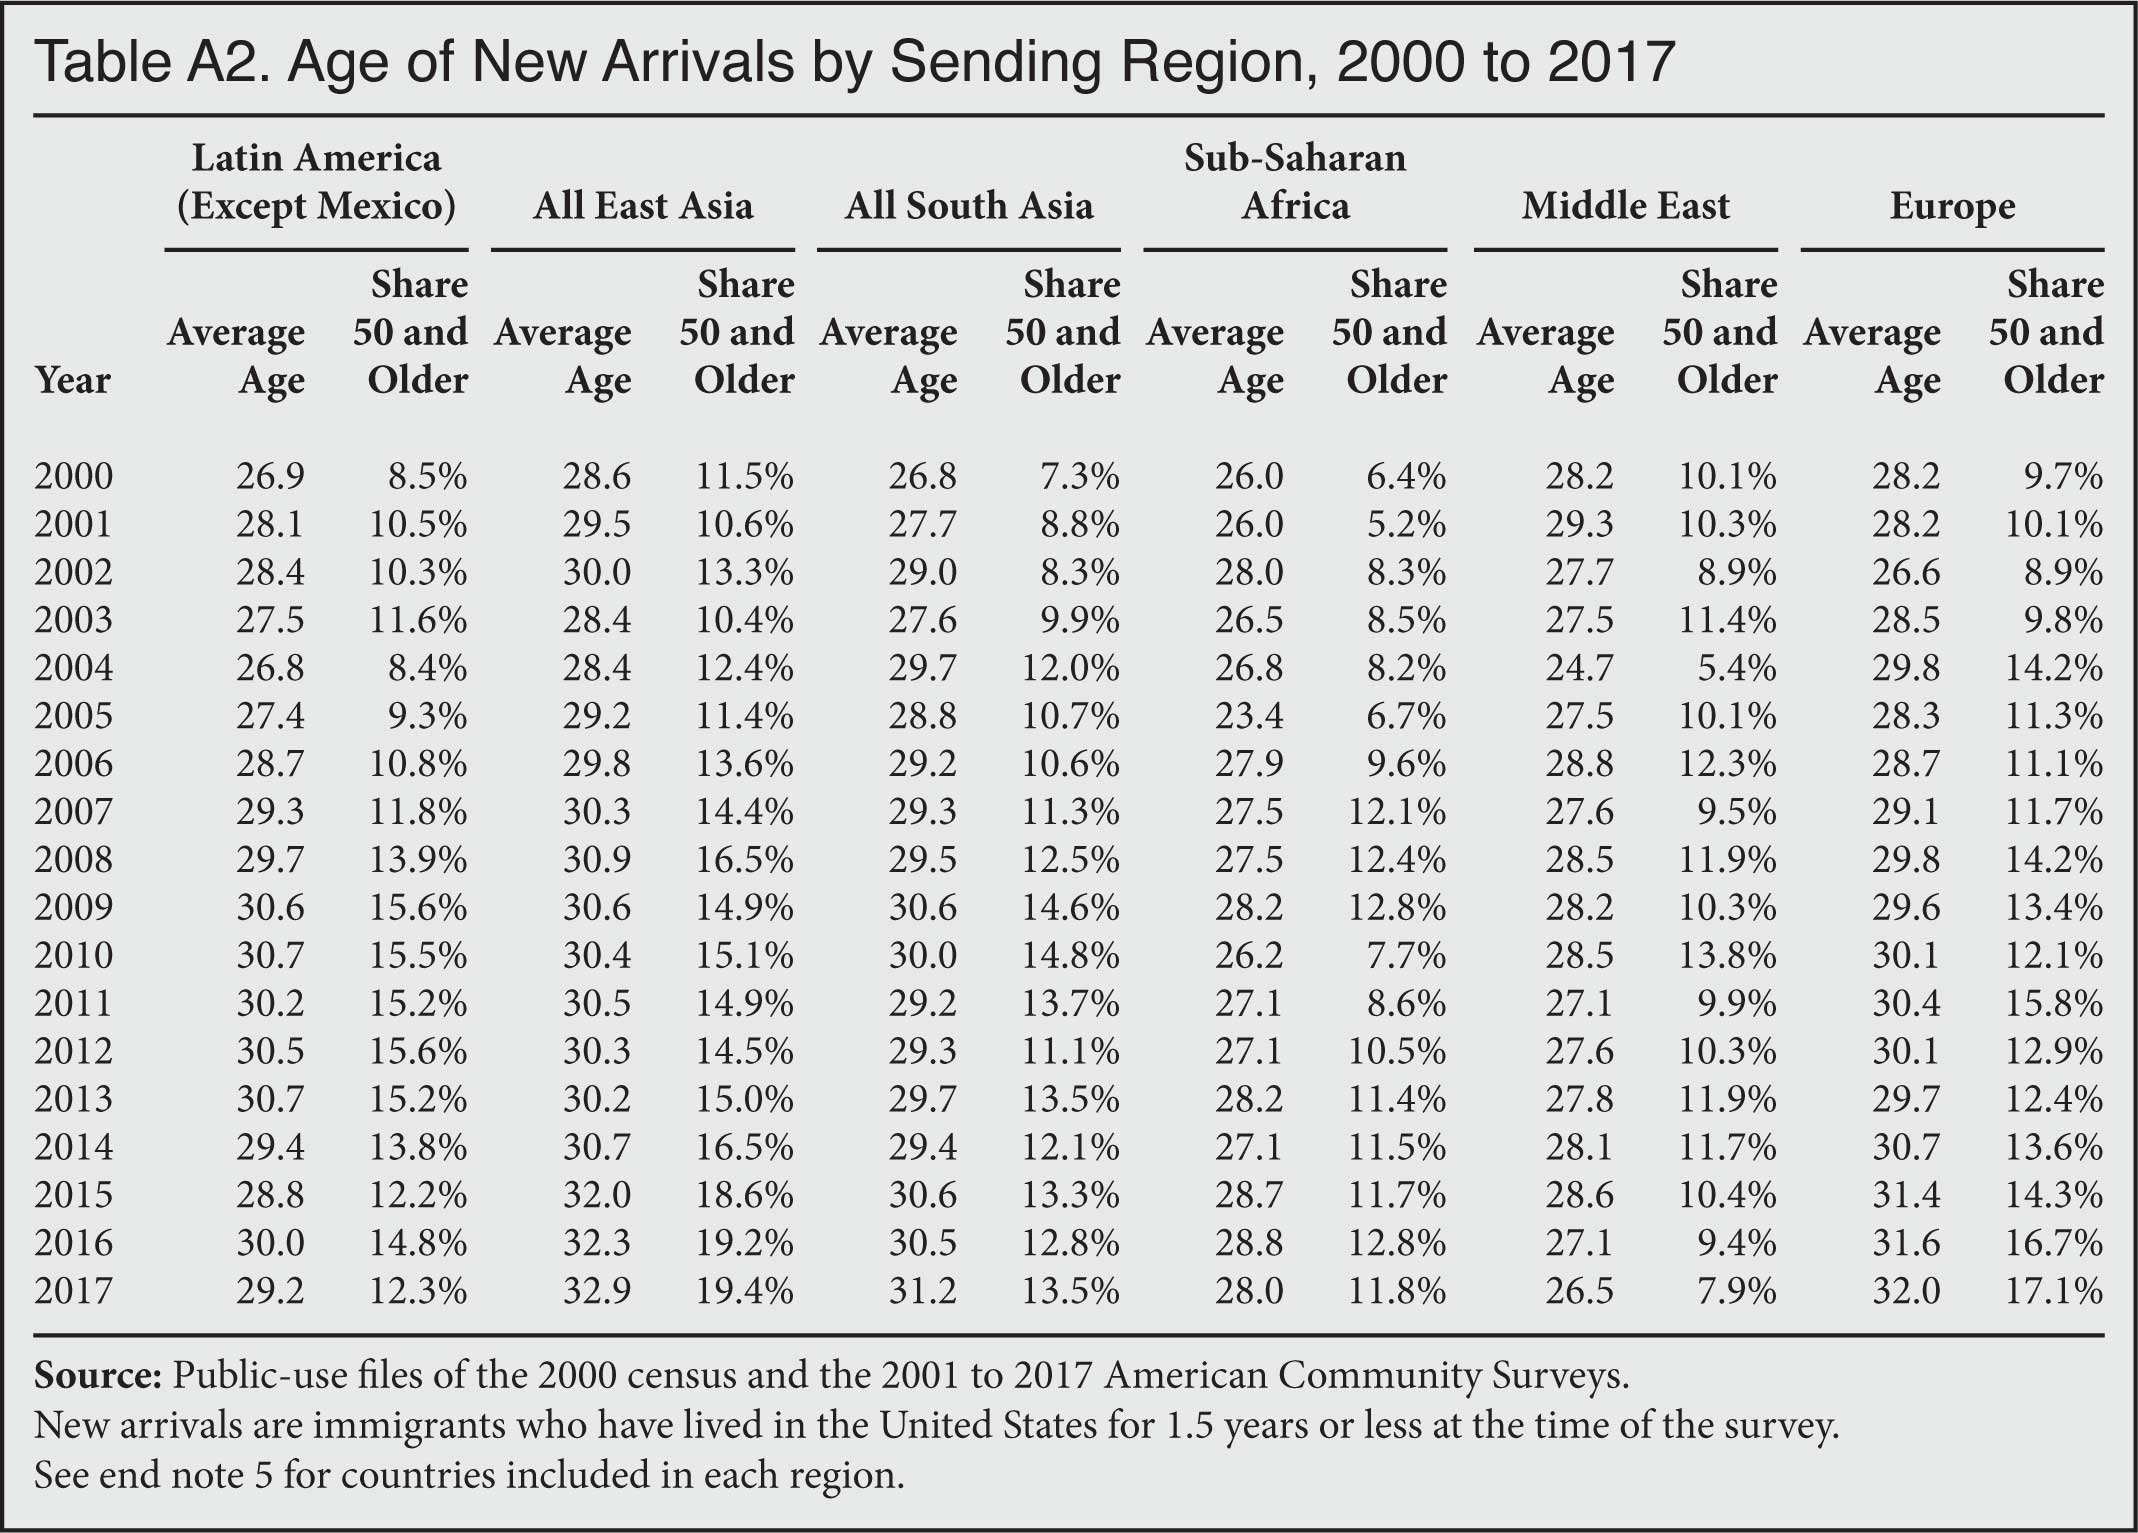 Table: Age of New Arrivals by Sending Region, 2000 to 2017